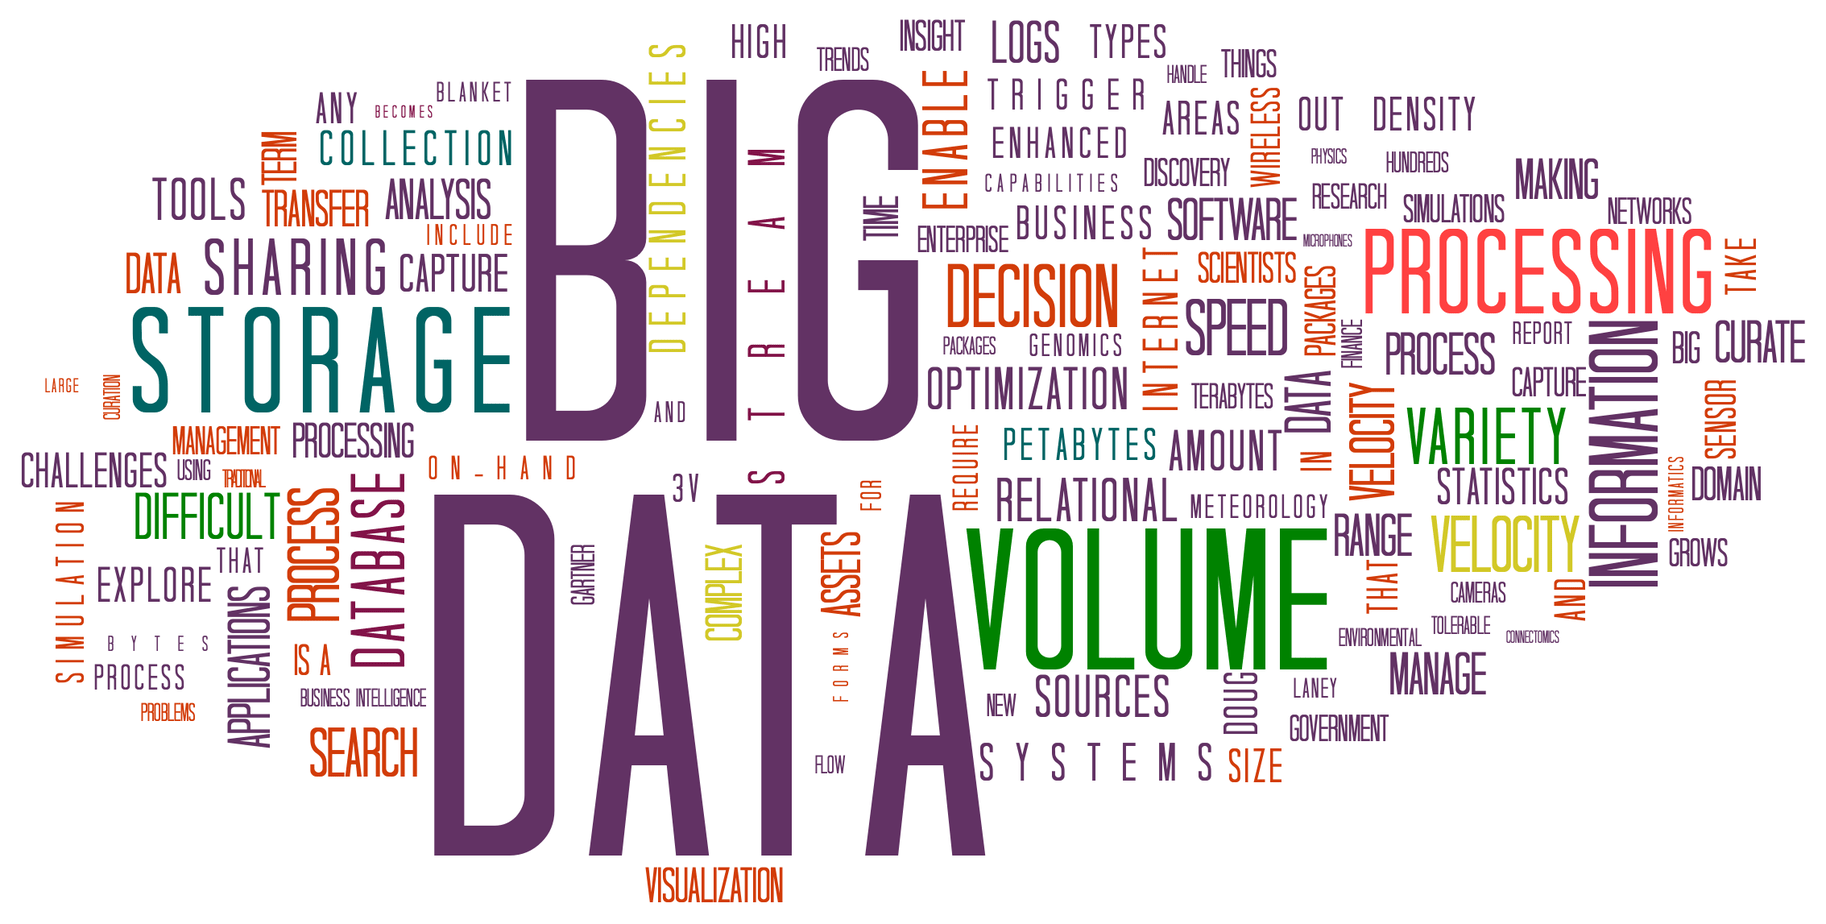 What Is Big Data and Why Should You Care About It? - 2